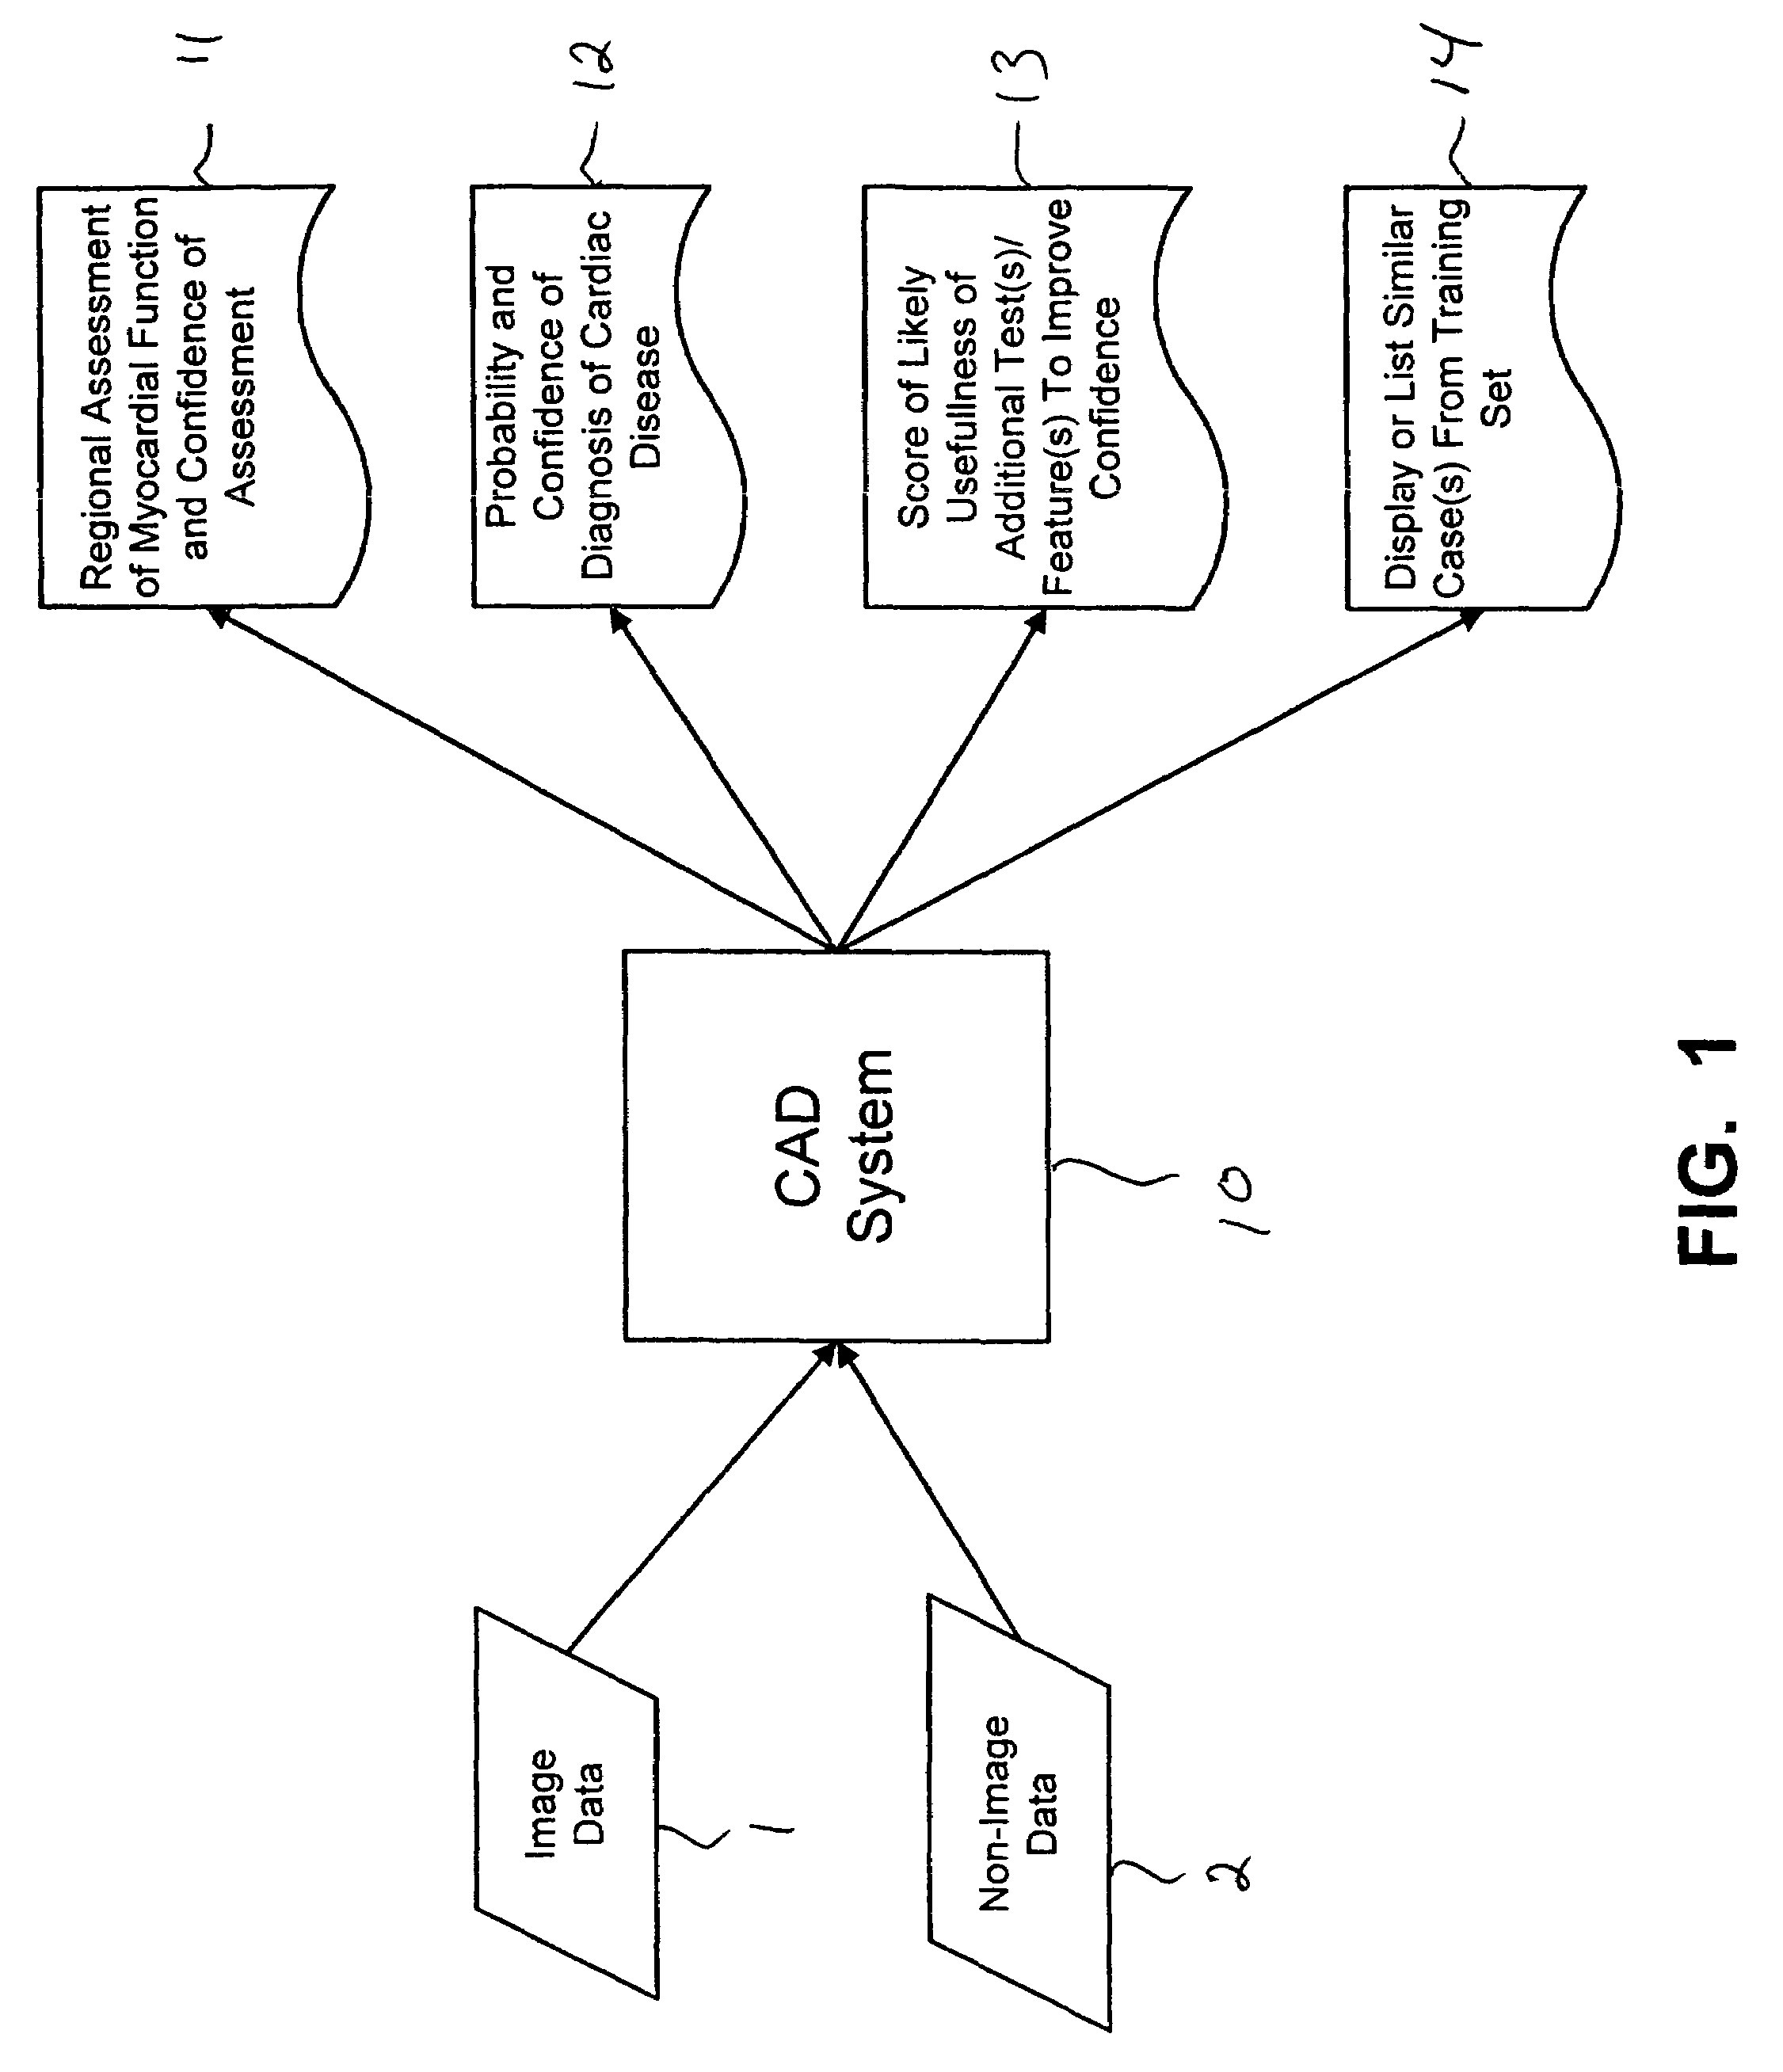 Systems and methods for providing automated regional myocardial assessment for cardiac imaging